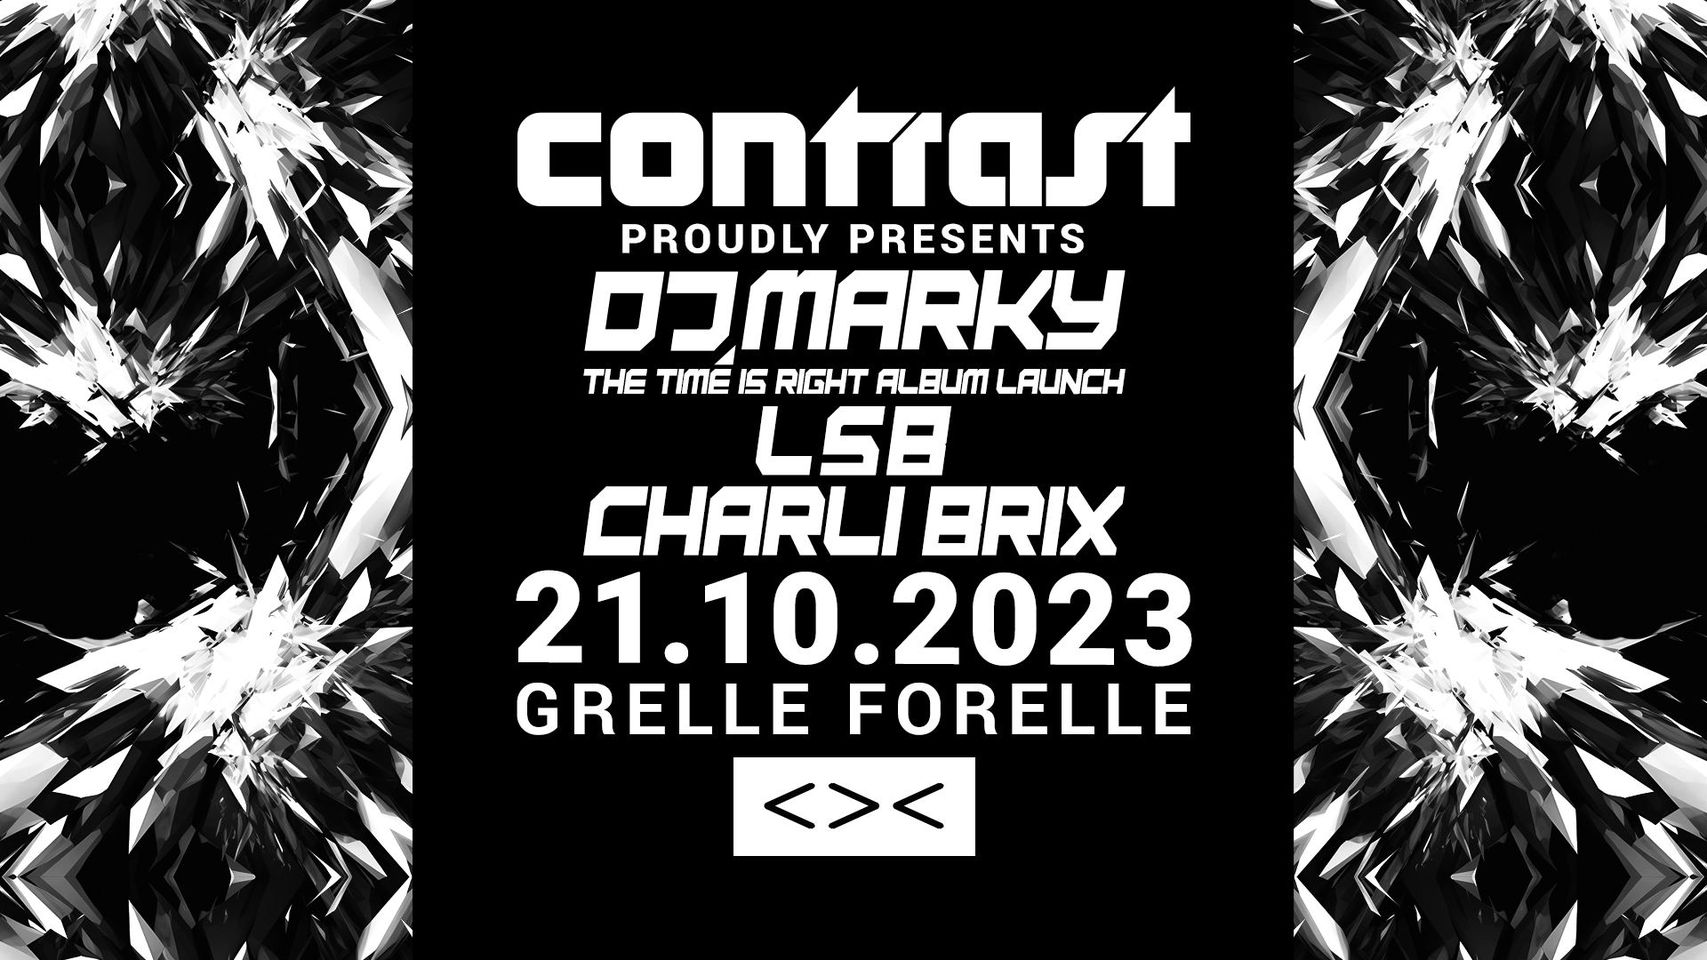 CONTRAST x CRITICAL MUSIC am 21. October 2023 @ Grelle Forelle.